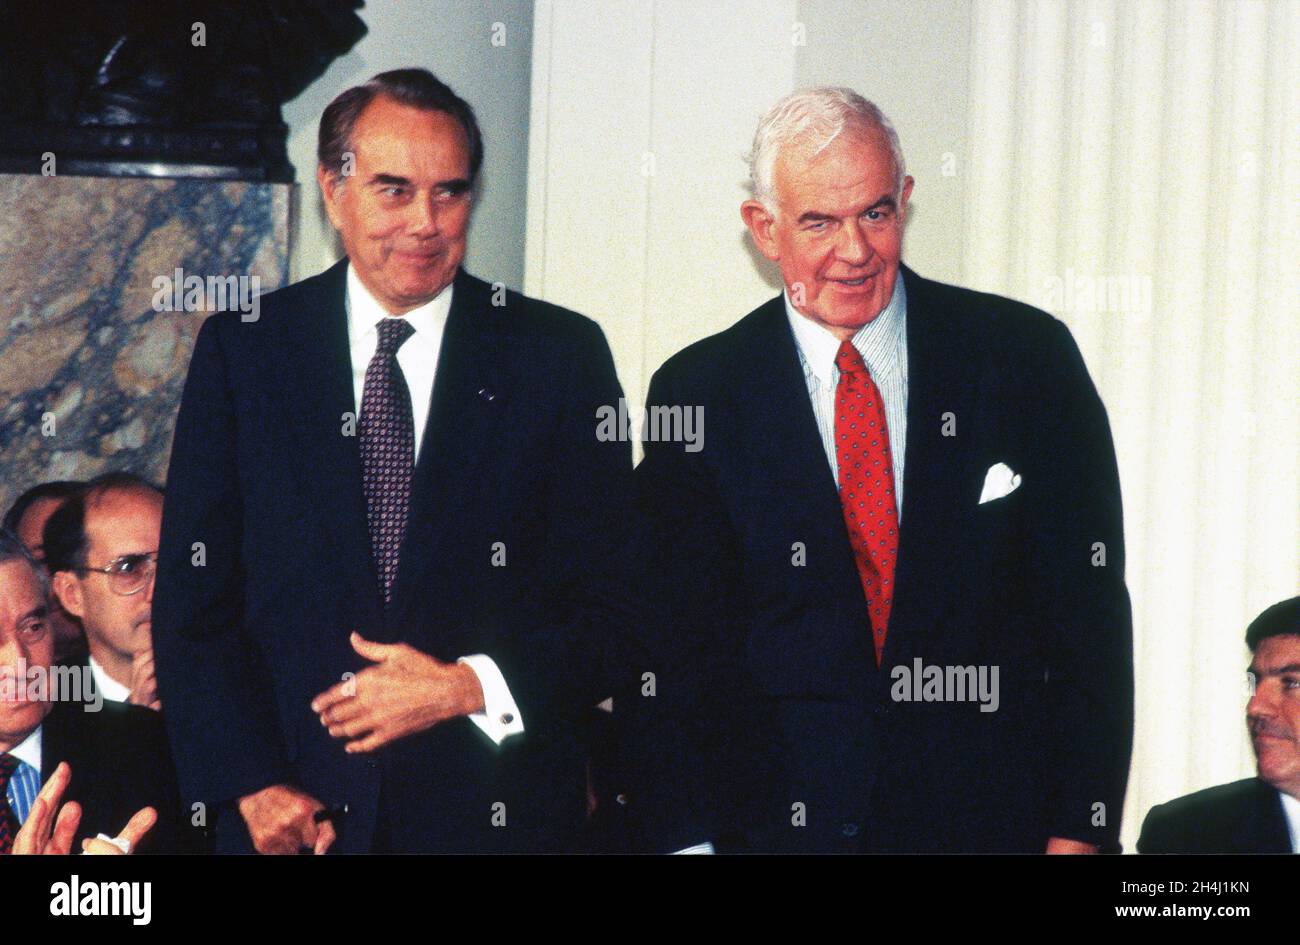 Incoming United States Senate Majority Leader Bob Dole (Republican of Kansas), left, and Speaker of the United States House of Representatives Tom Foley (Democrat of Washington), right, attend the signing of the multinational GATT Treaty at the Organization of American States Building in Washington, DC on Thursday, December 8, 1994. Credit: Ron Sachs/CNP Stock Photo